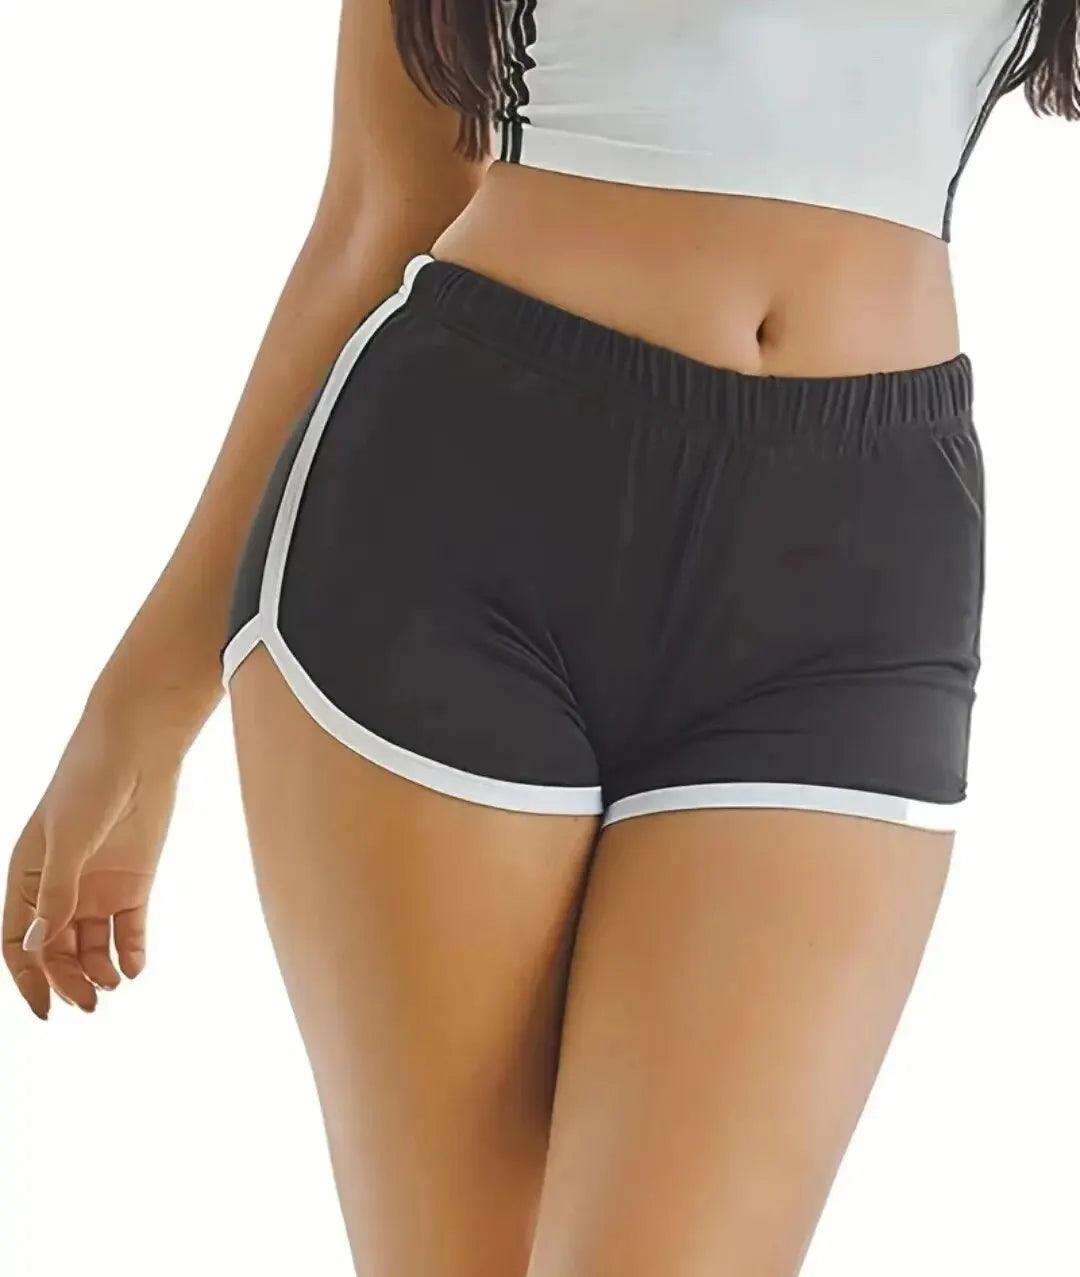 High-Waisted Acrylic Sports Shorts for Women: Versatile Yoga Pants with Anti-Walking Feature  ourlum.com   